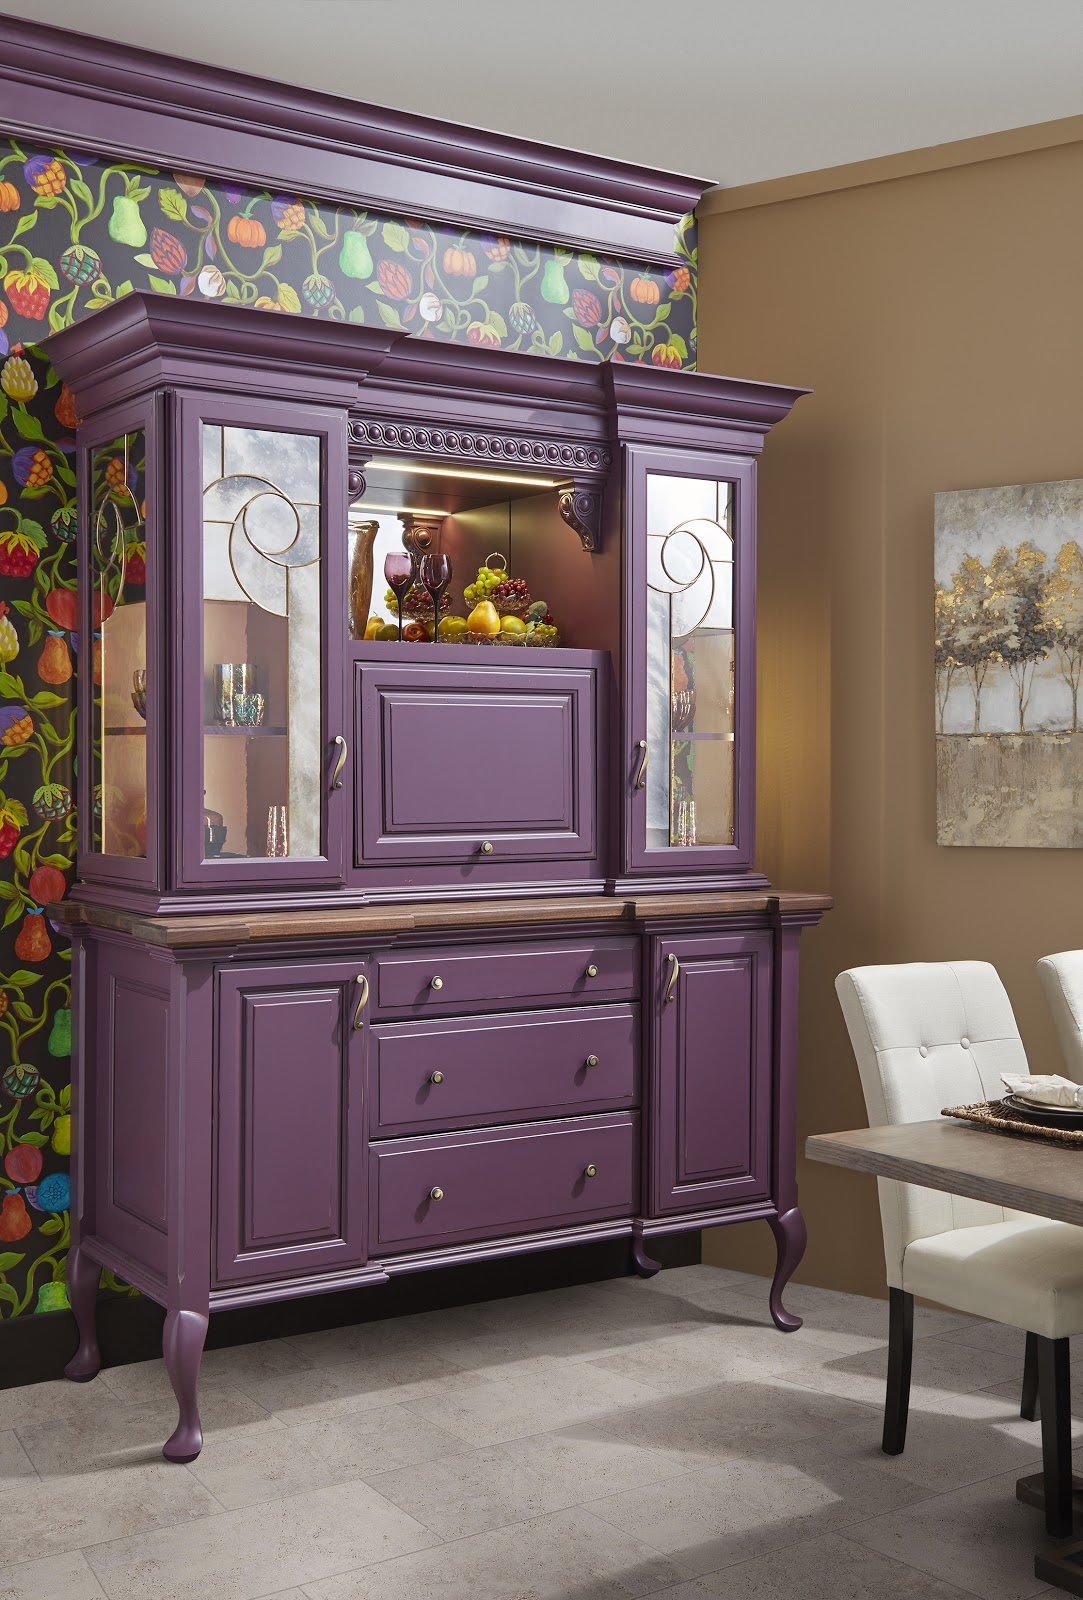 Painted Sideboard Hutch - Purle Hutch KBIS 2019